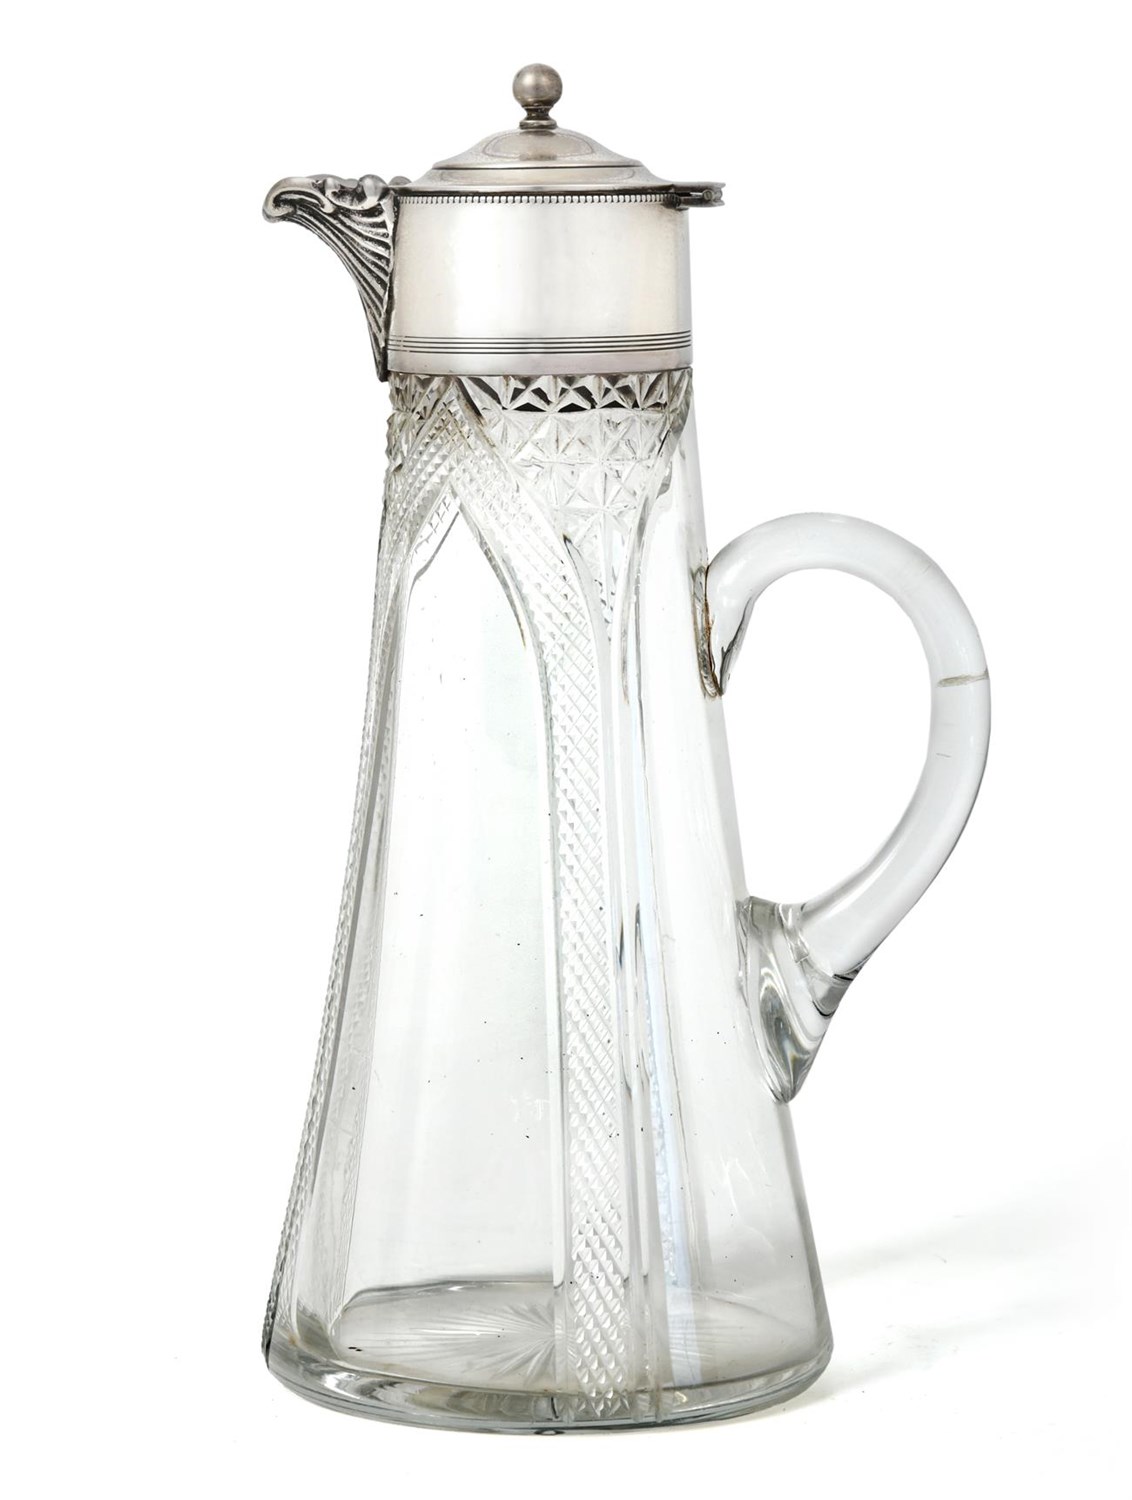 Lot 72 - A George V Silver-Mounted Cut-Glass Claret-Jug, by Martin Hall and Co. Ltd., Birmingham, 1918,...